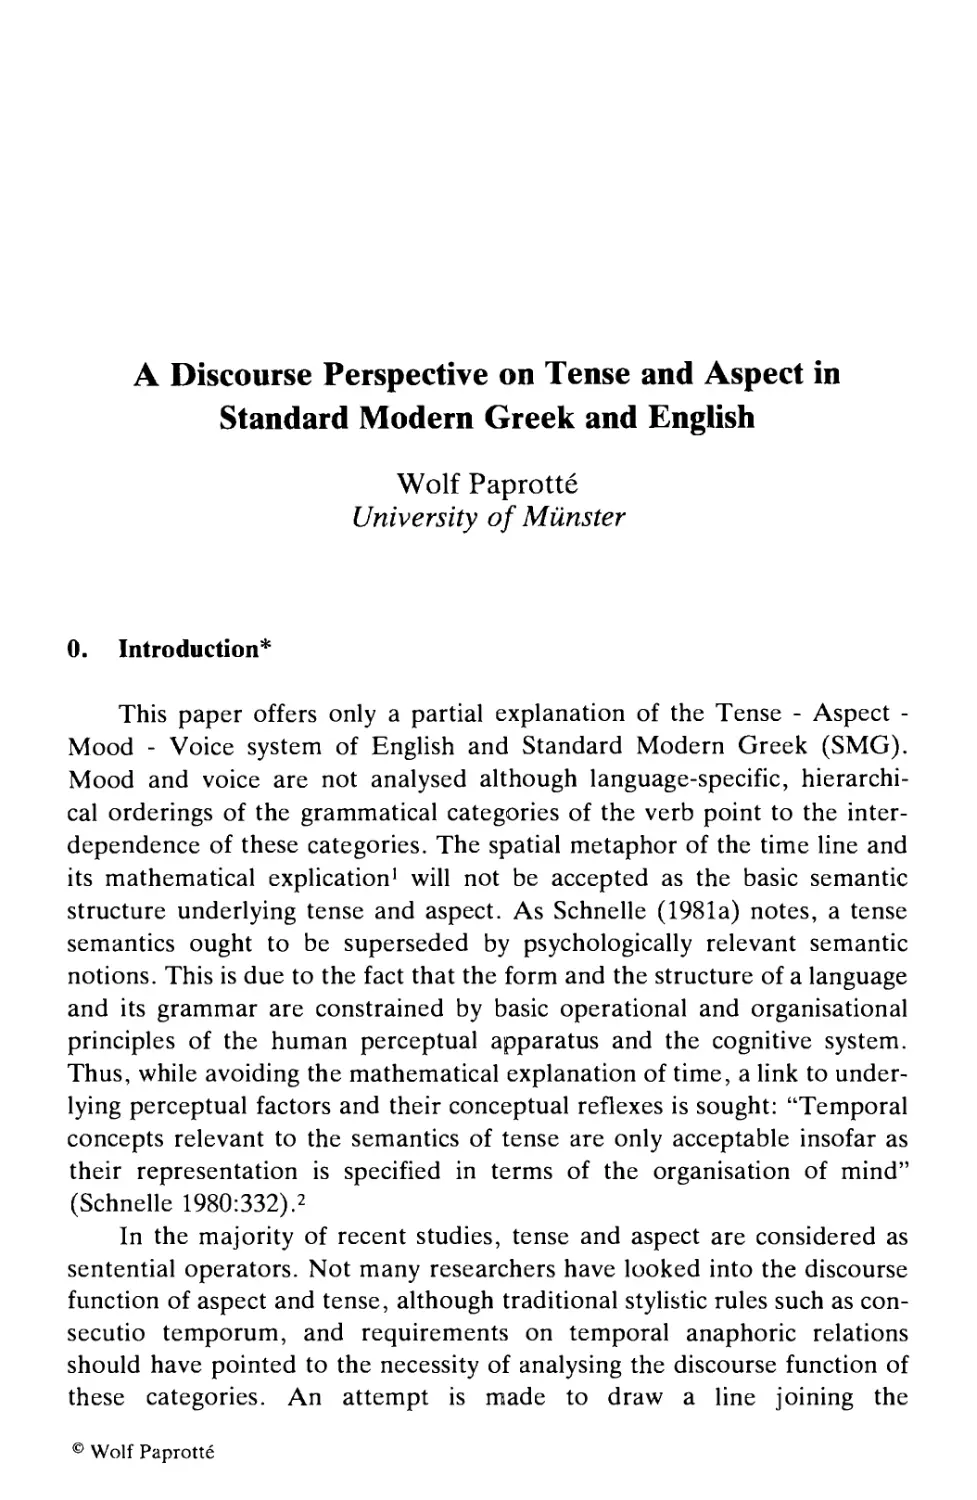 A Discourse Perspective on Tense and Aspect in Standard Modern Greek and English